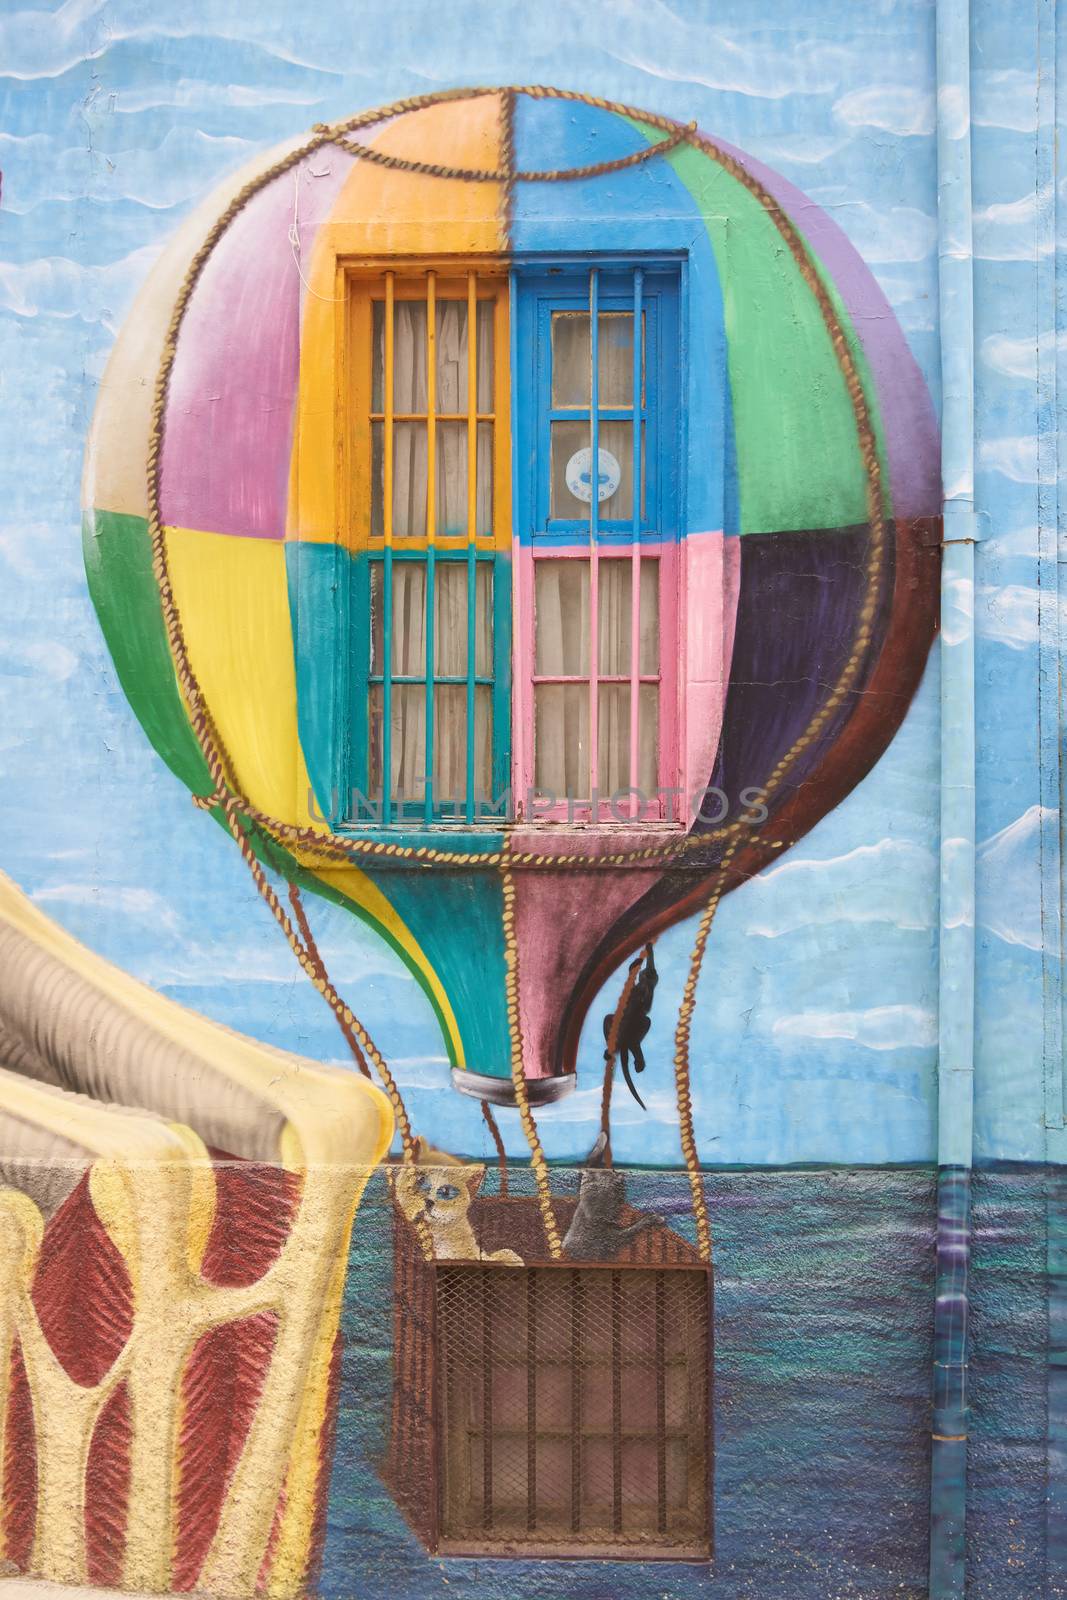 Colourful murals decorating the walls of buildings in the historic port city of Valparaiso in Chile.